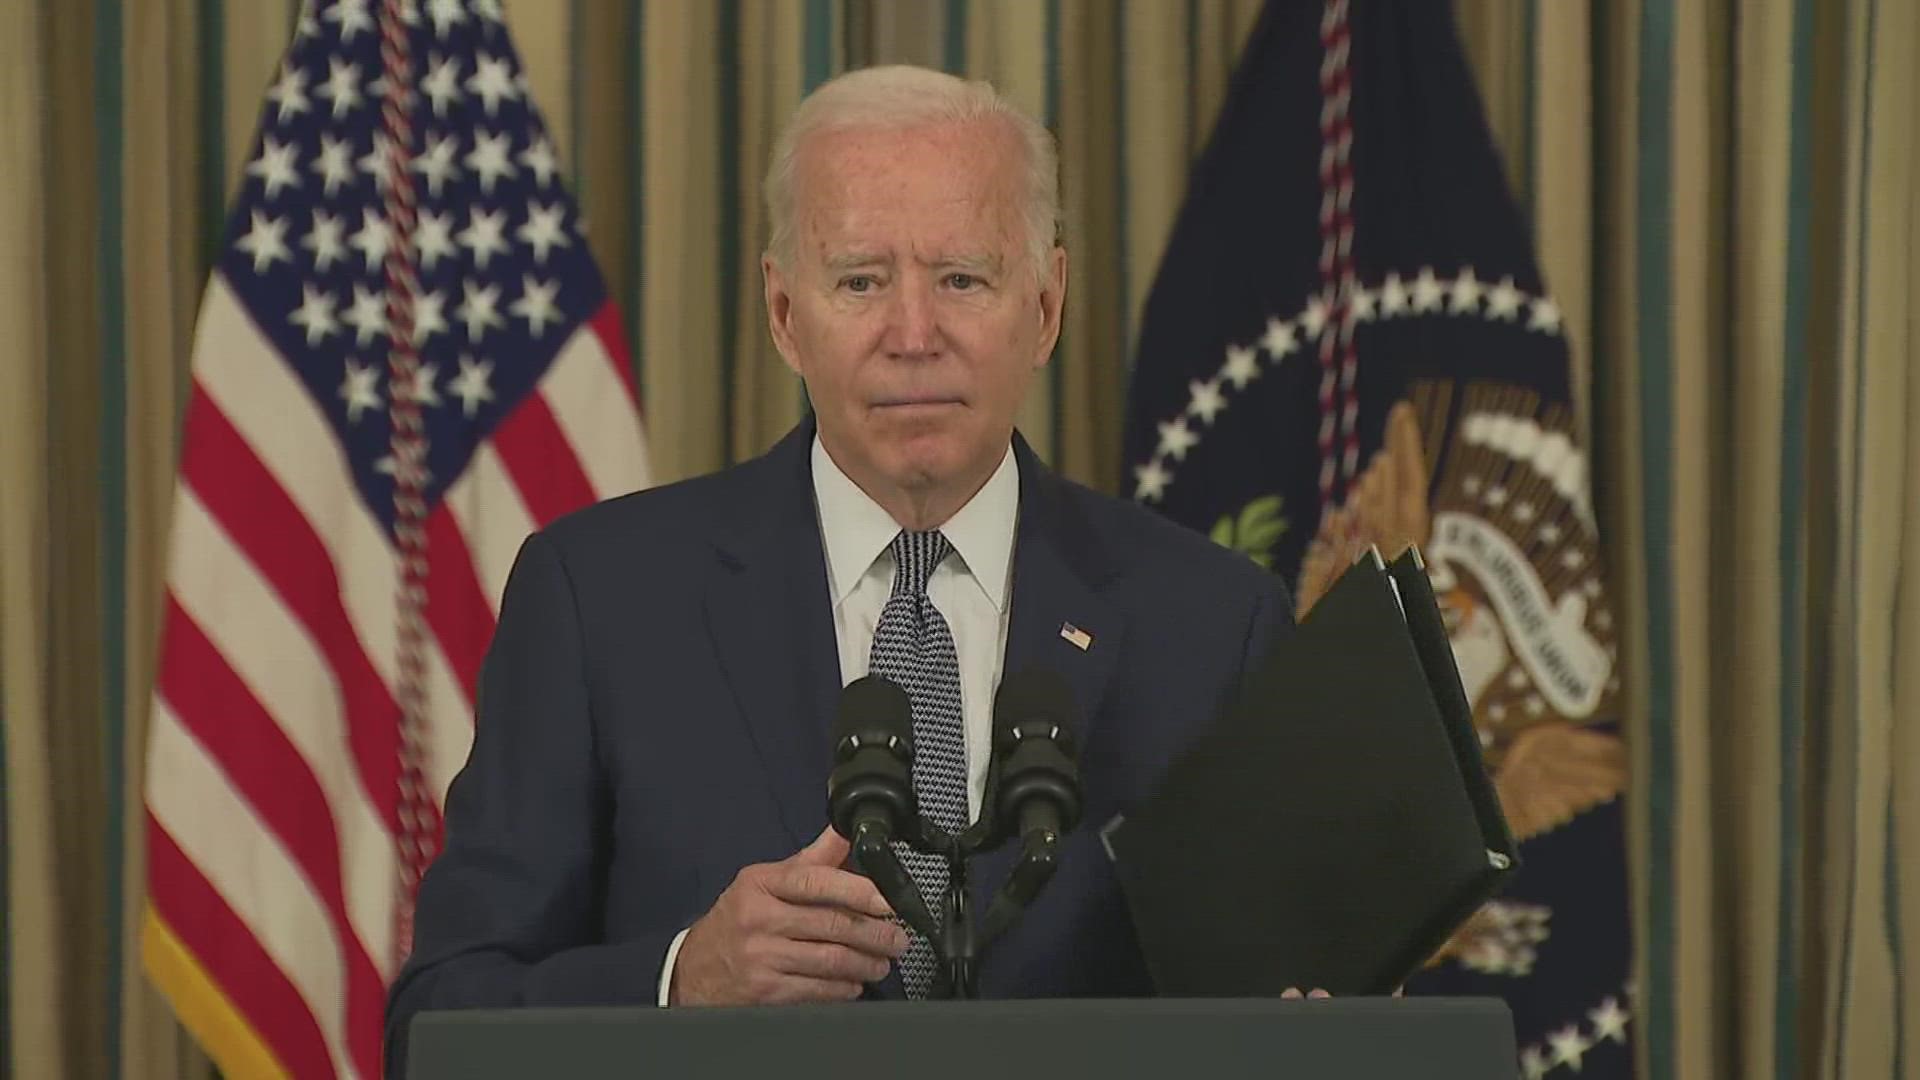 As Biden traveled to Louisiana to view Hurricane Ida recovery efforts, he will also urge Texas lawmakers to rethink restrictive legislation to ban abortion there.